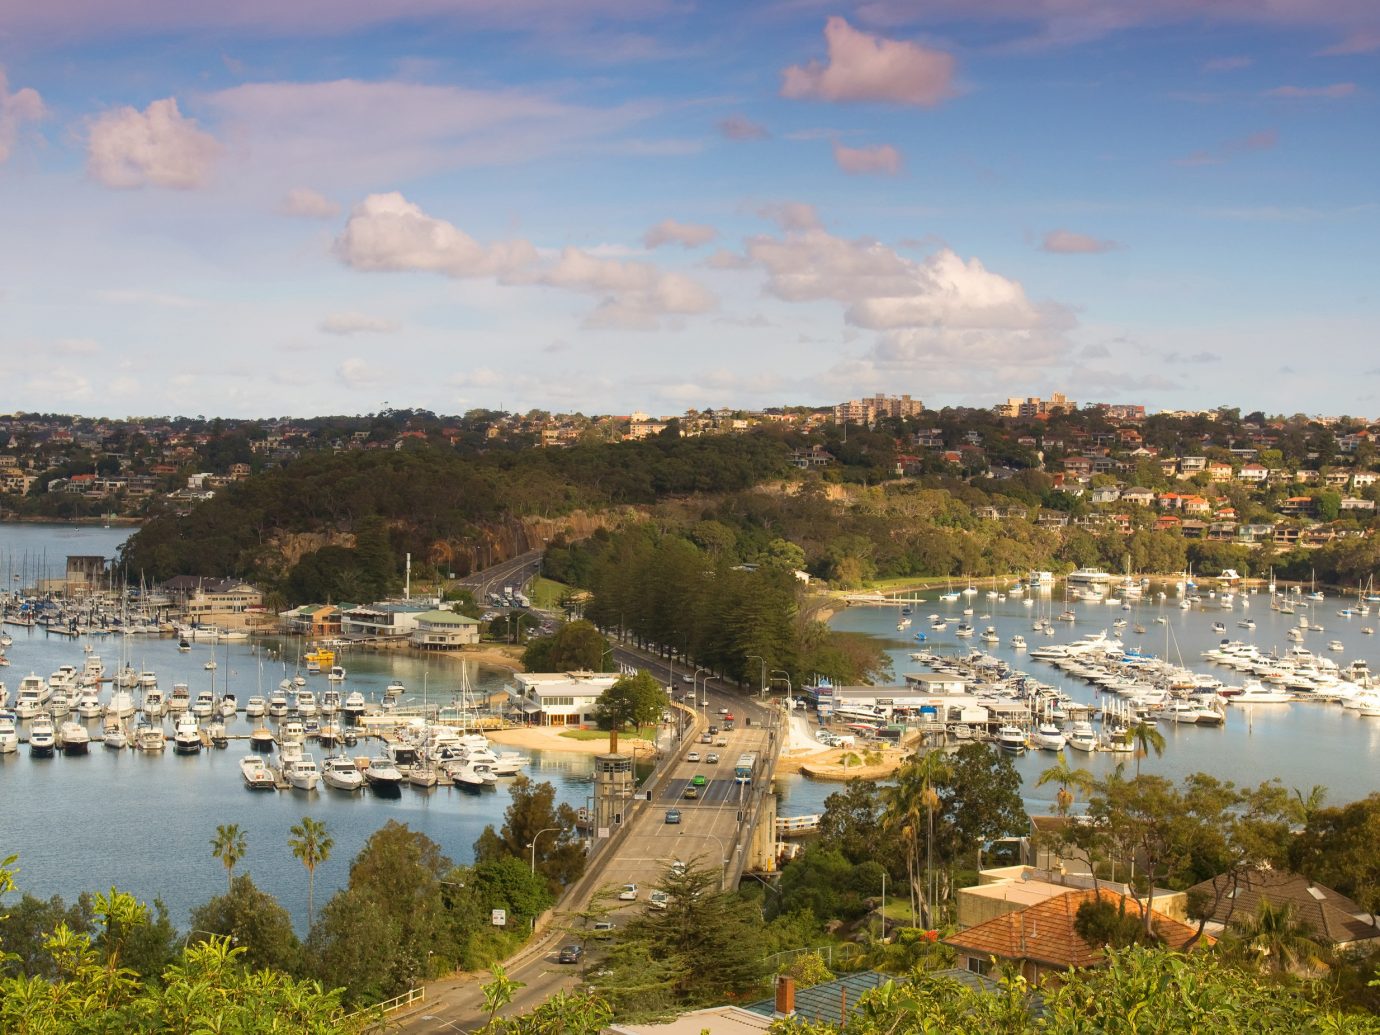 Outdoors + Adventure Sydney water outdoor sky Boat City marina Nature Lake River Harbor bird's eye view Sea bay Coast aerial photography horizon suburb cloud panorama tree reservoir dock port inlet skyline tourism shore overlooking surrounded several